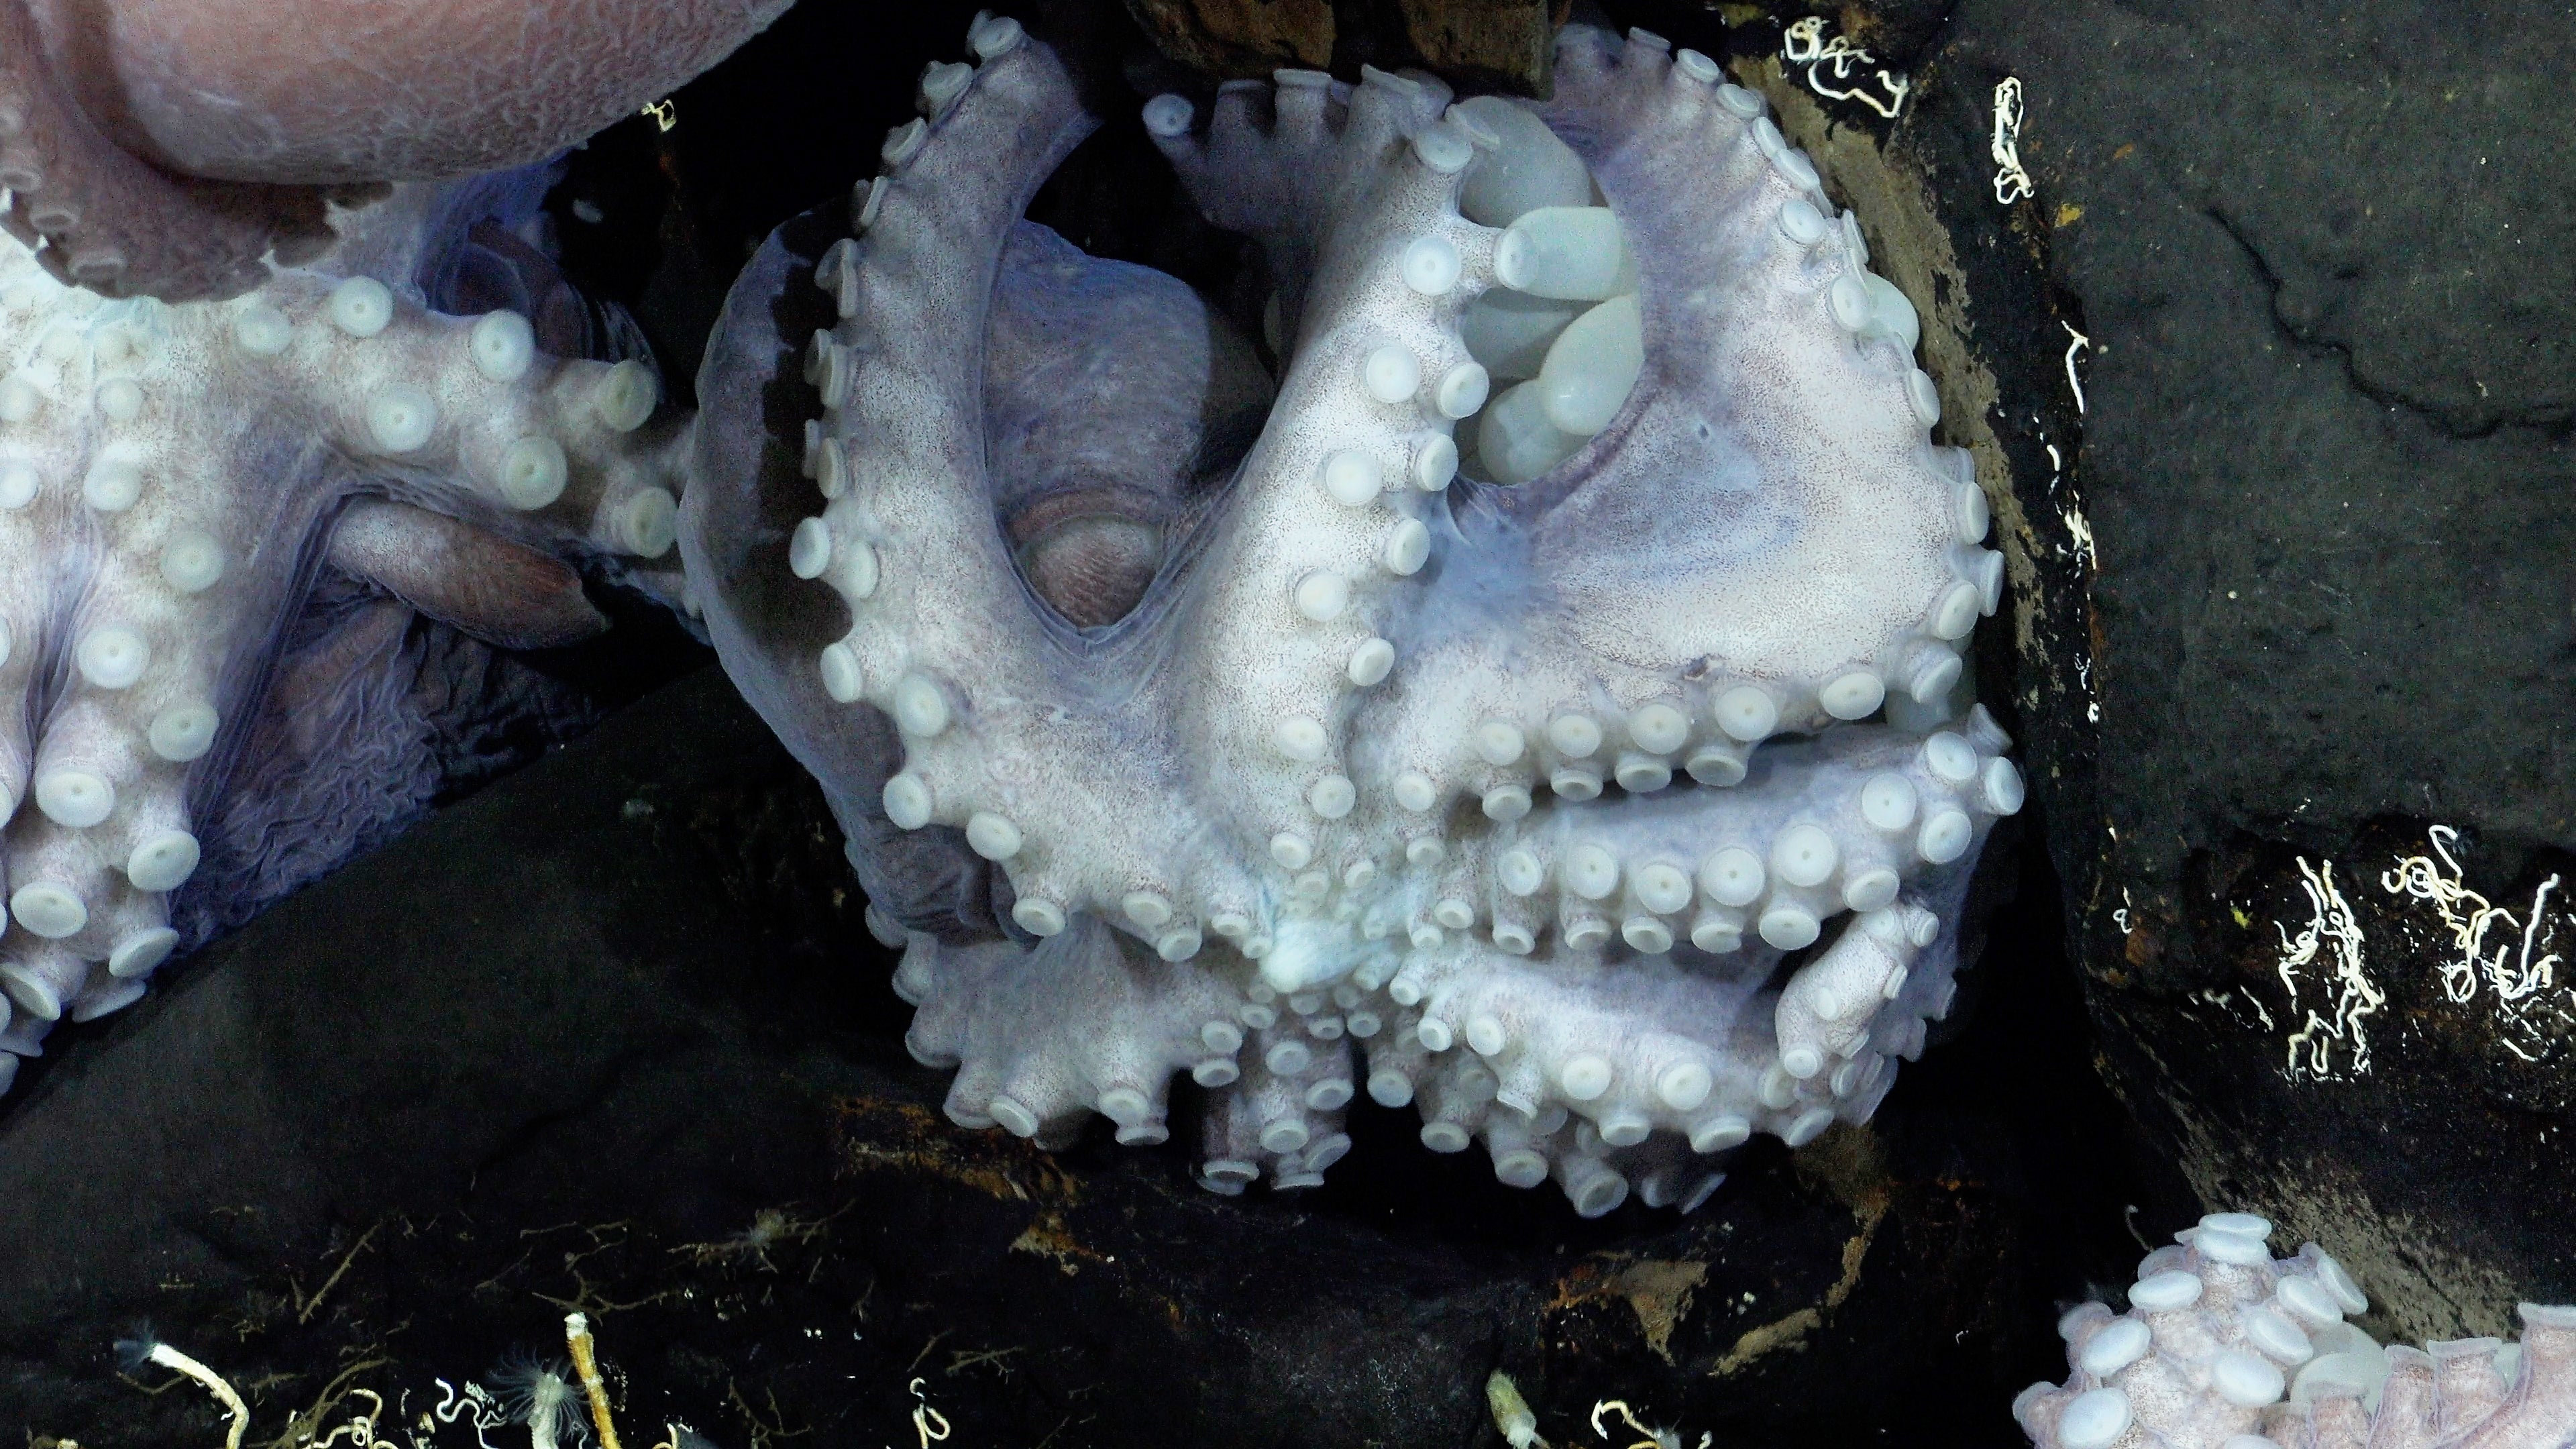 A brooding octopus with its clutch of eggs at the Dorado Outcrop.